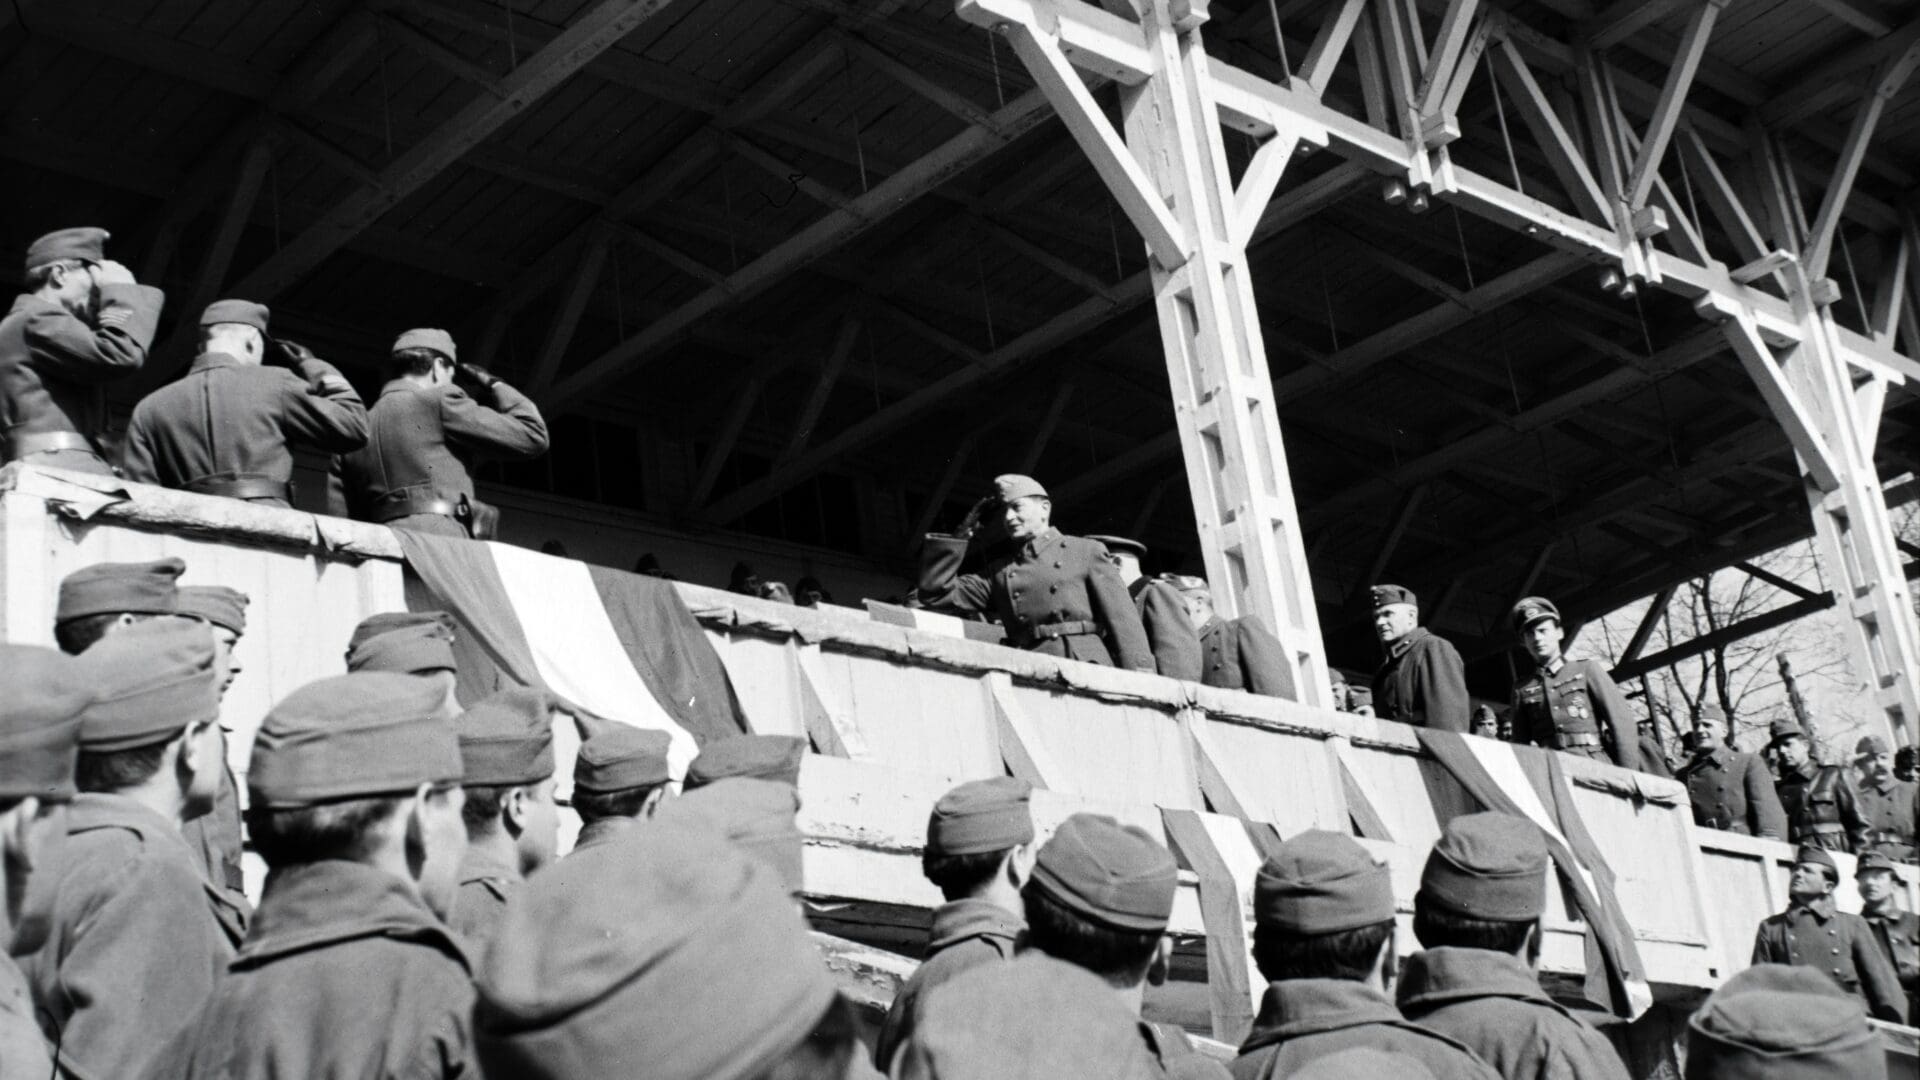 The marking of the withdrawal of Hungarian troops from the Ukrainian theatre of operations in the German Stadium (today Valeriy Lobanovskyi Stadium) in Kiev in 1943. Gusztáv Jány is at the centre of the photo saluting.